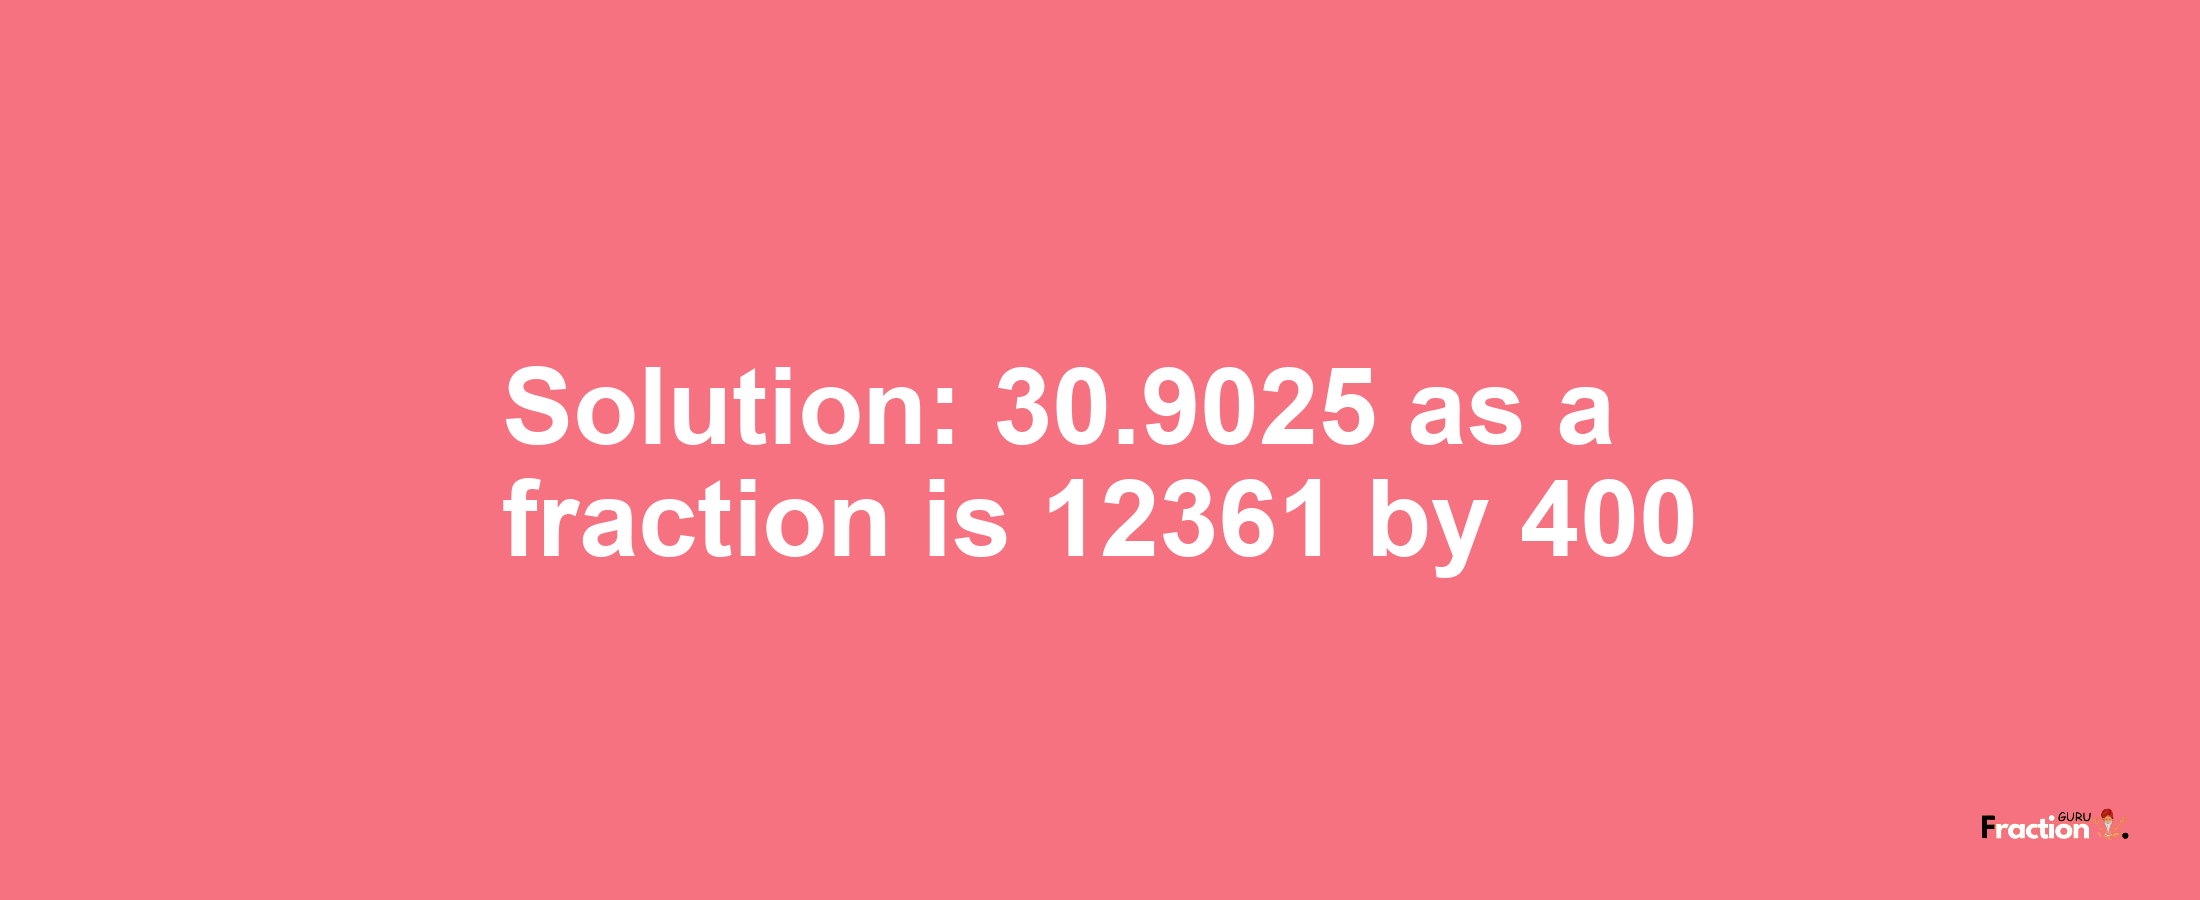 Solution:30.9025 as a fraction is 12361/400